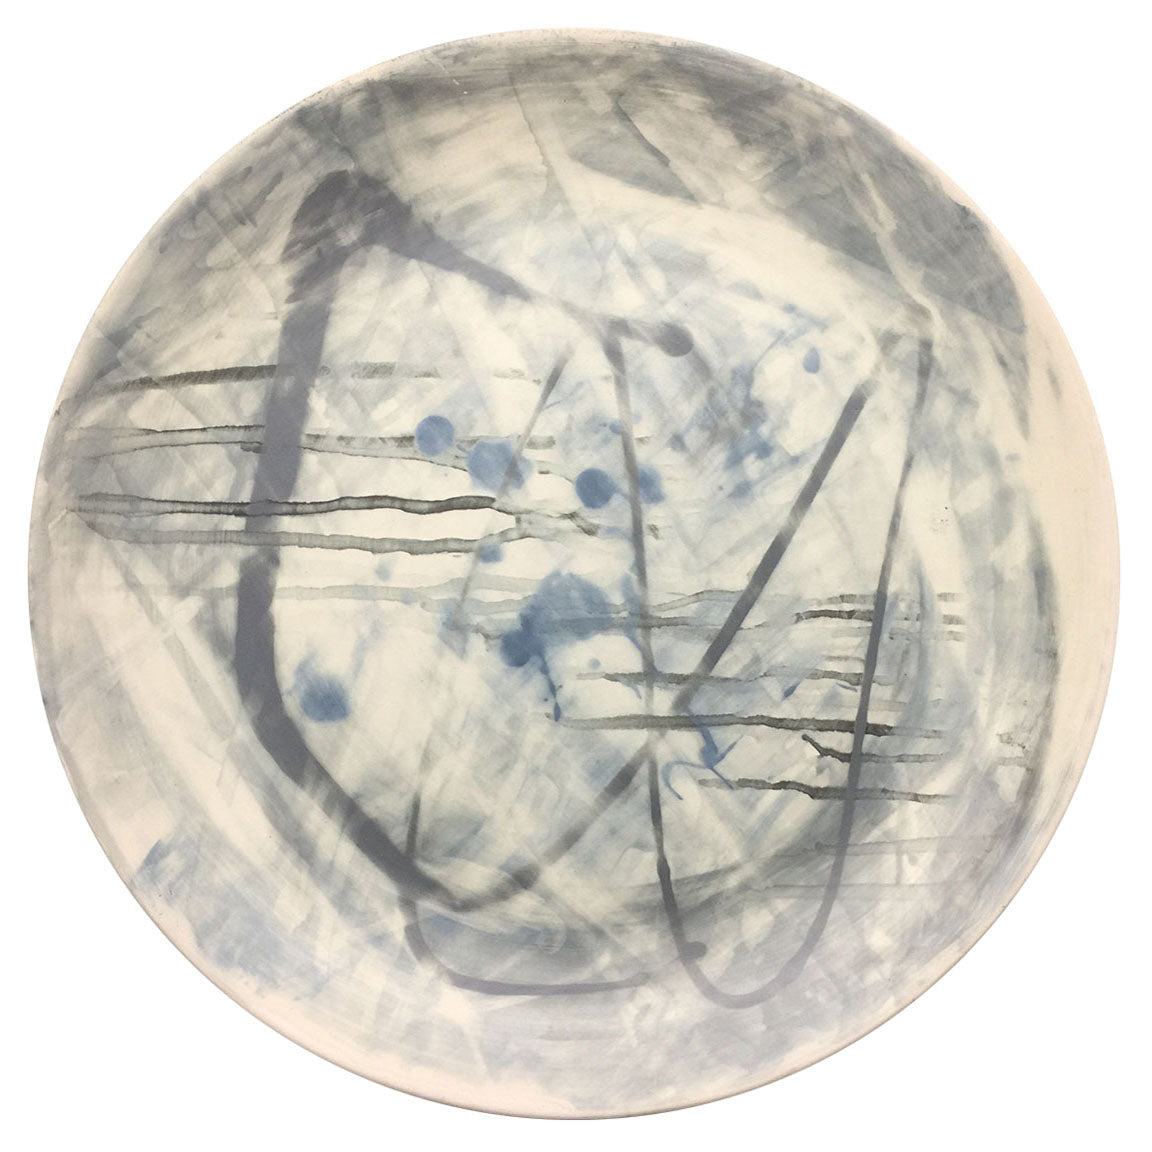 PLATTER #23 - BLACK, GREY, BLUE & CHARTREUSE - HAND-PAINTED EARTHENWARE